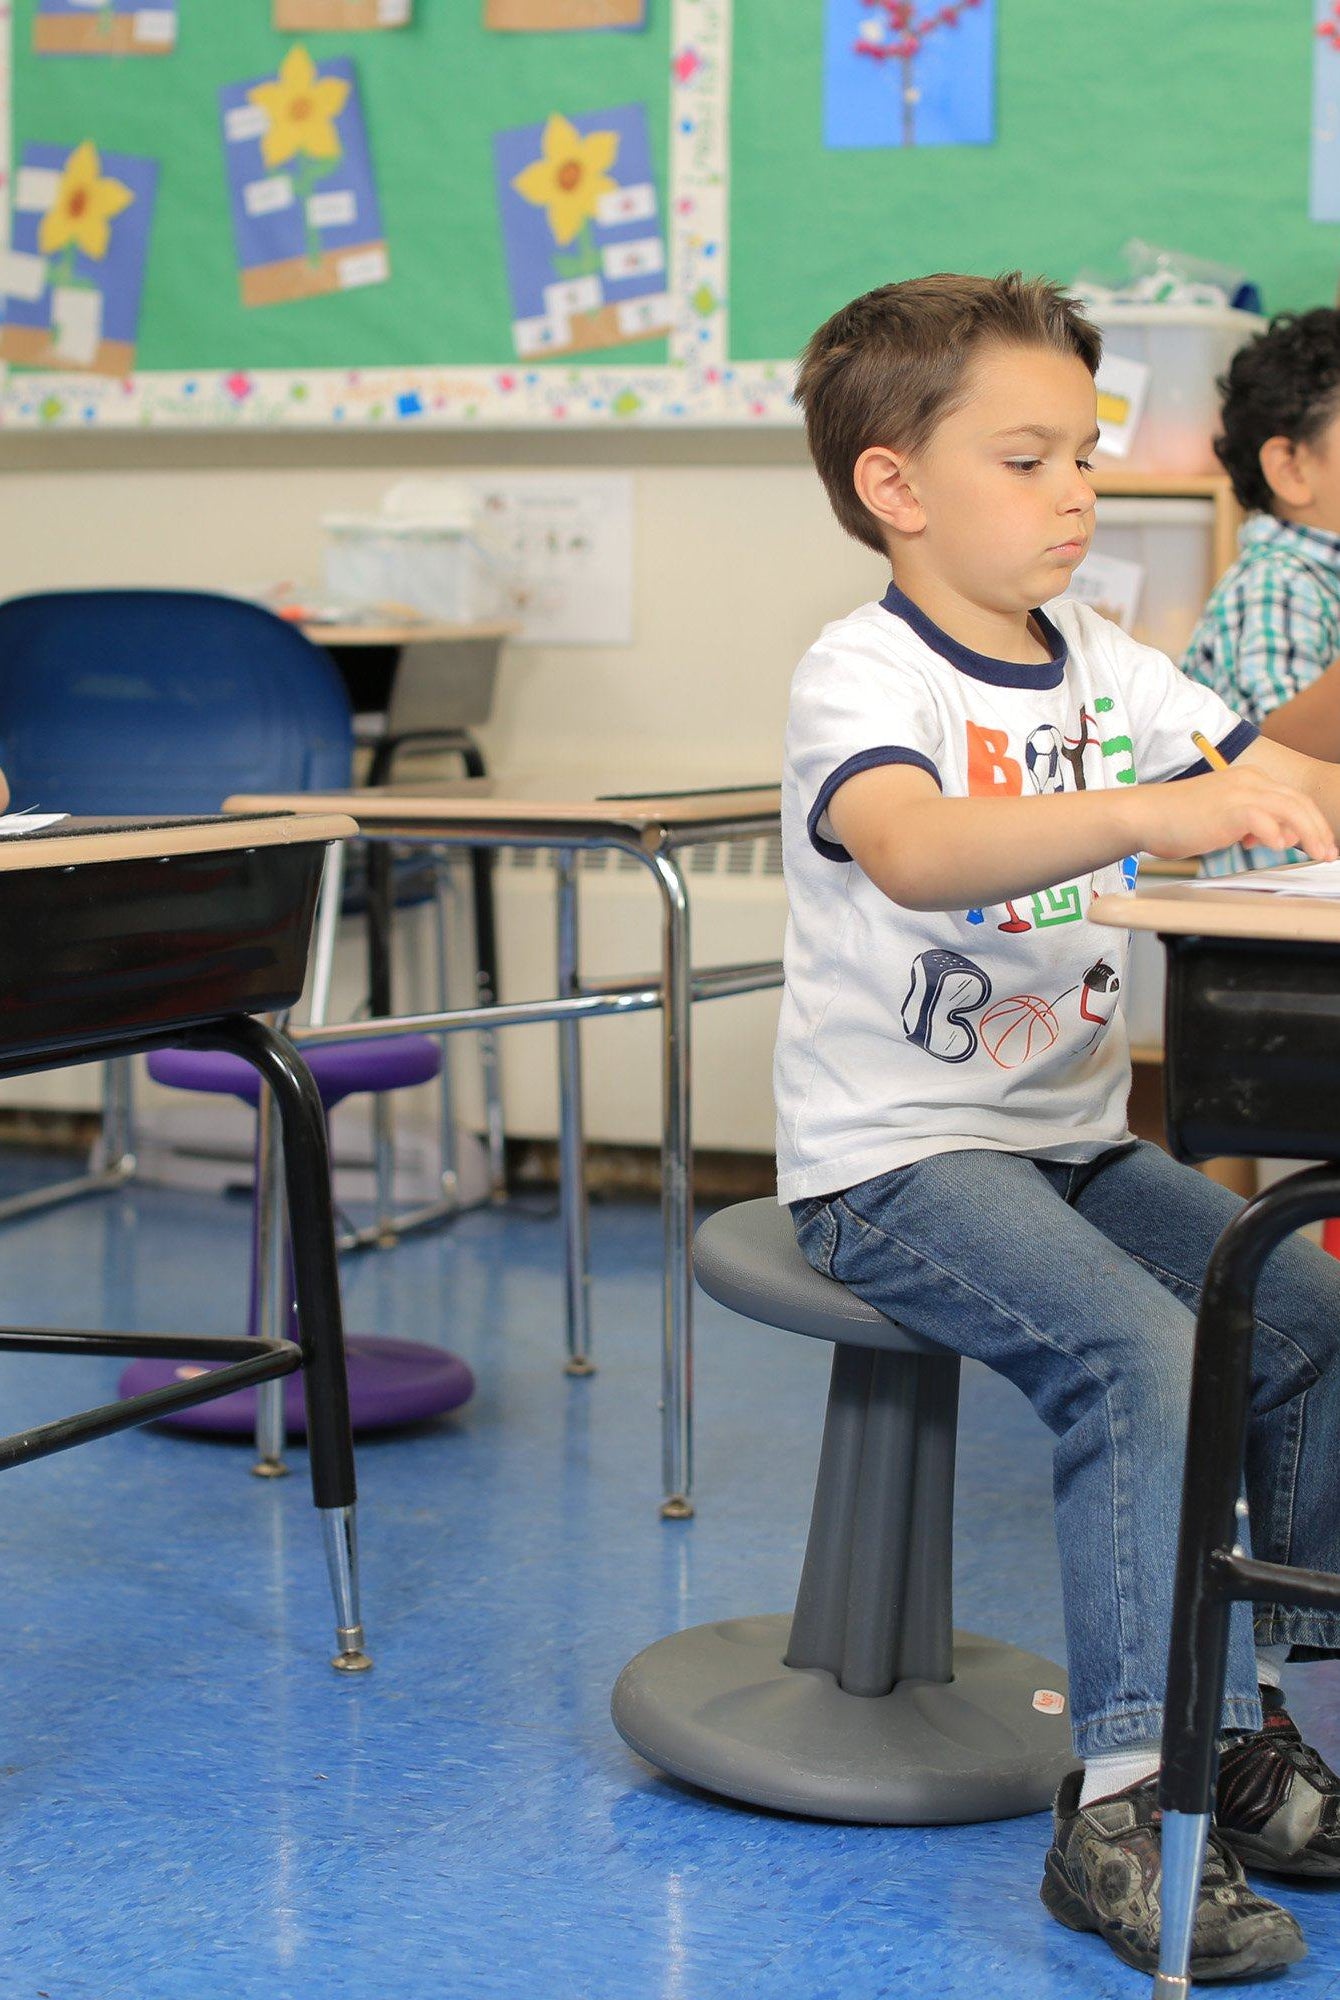 Kids using Kore Kids Wobble Chair 14" in classroom from Active Goods Canada